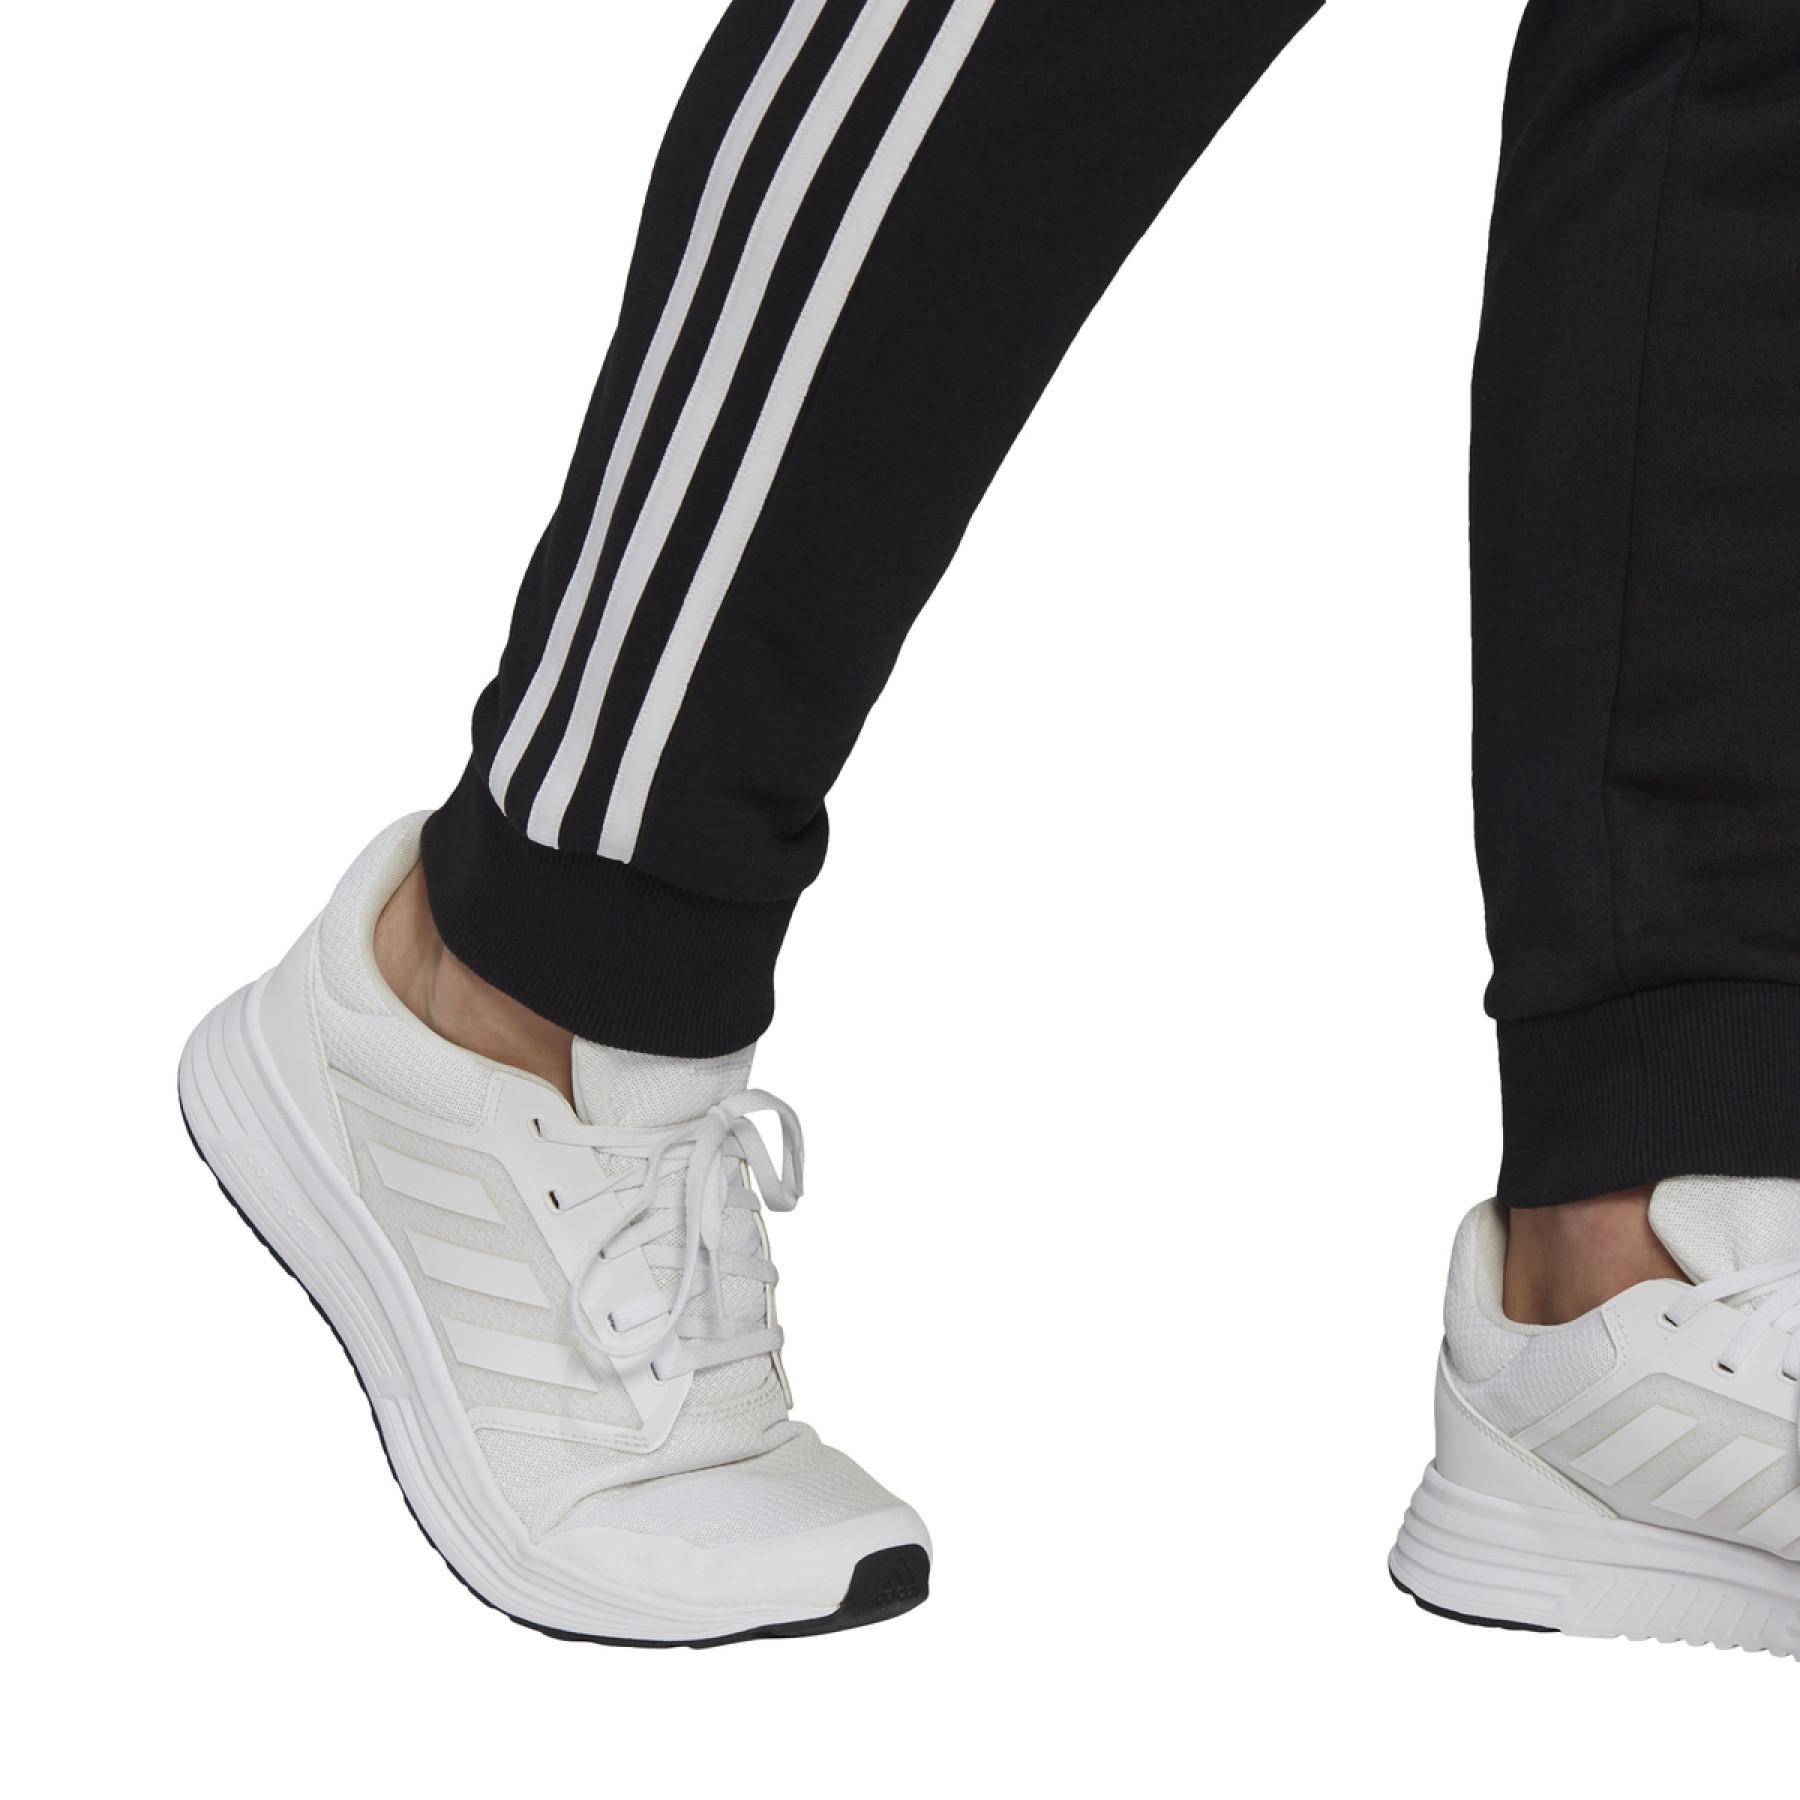 Byxor adidas Essentials French Terry Tapered Cuff 3-Bandes